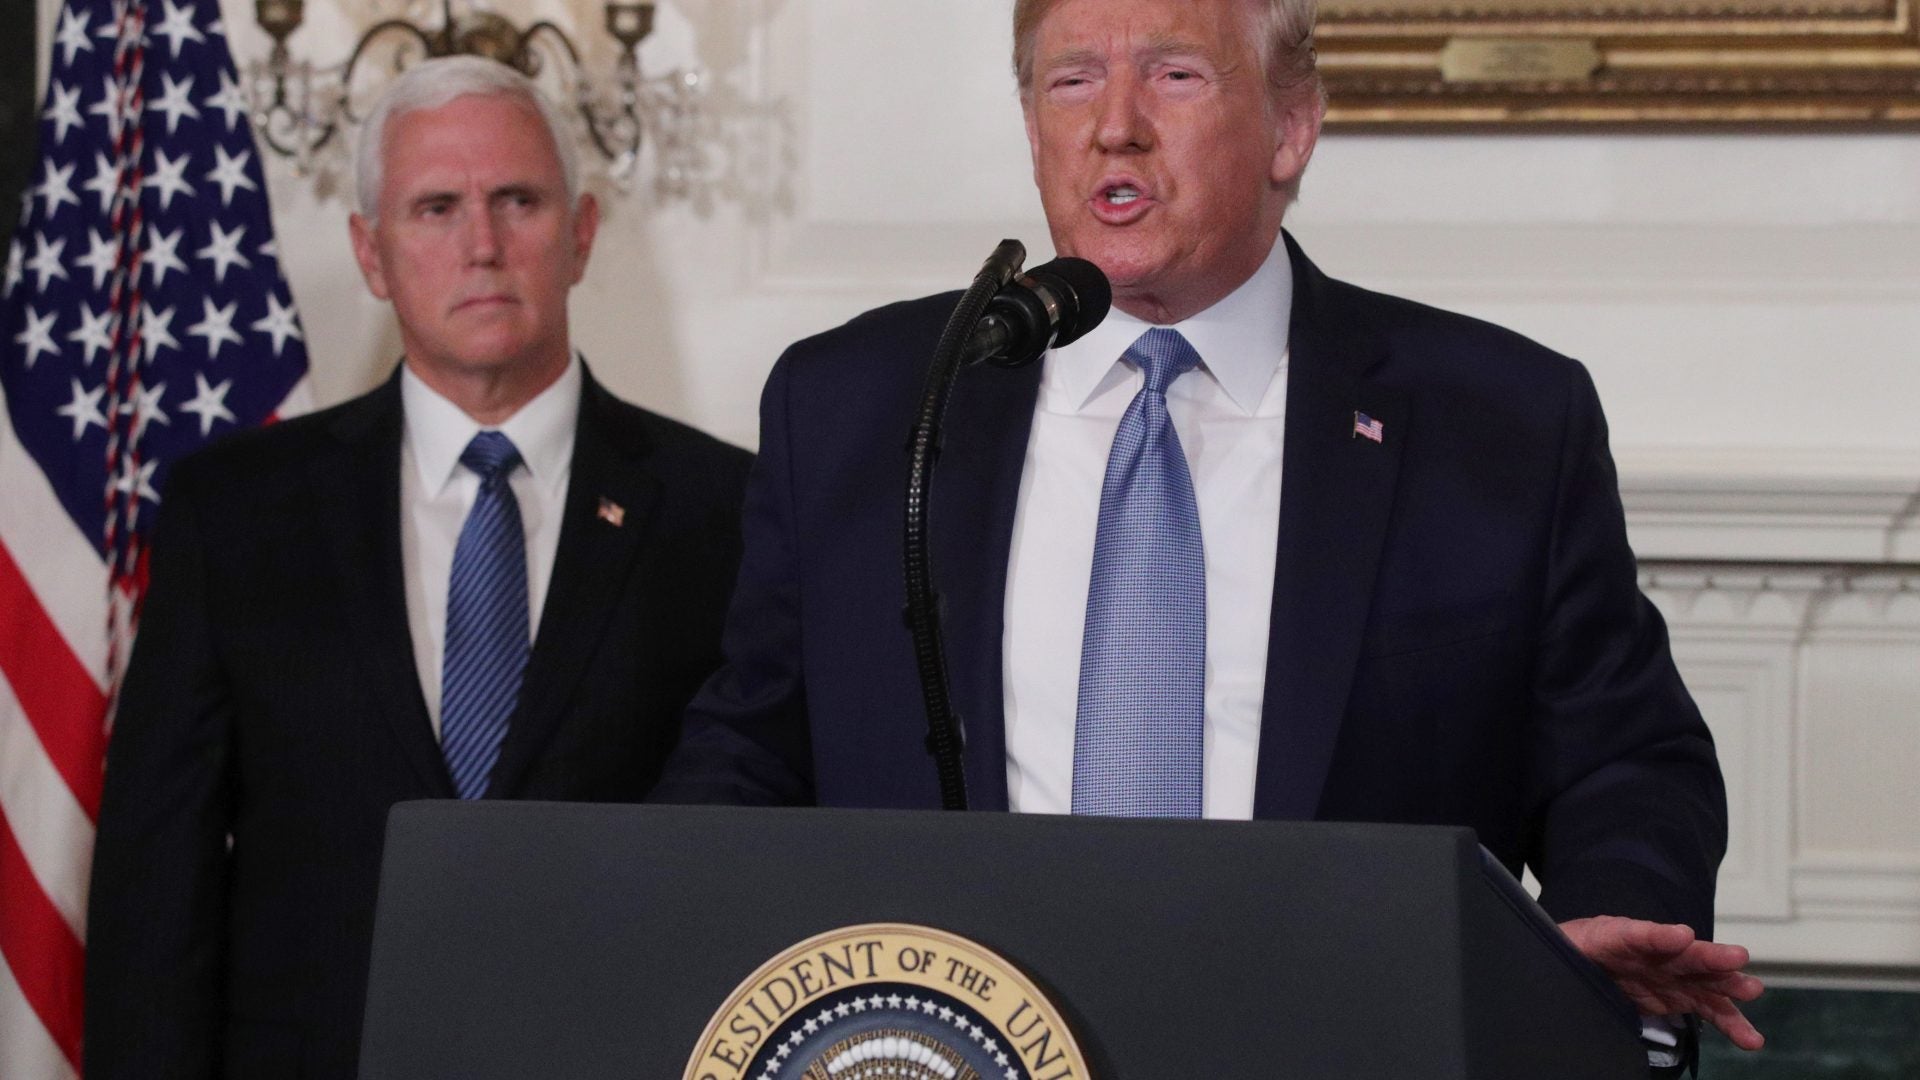 Donald Trump Condemns ‘White Supremacy’ In Remarks Addressing El Paso, Dayton Mass Shootings